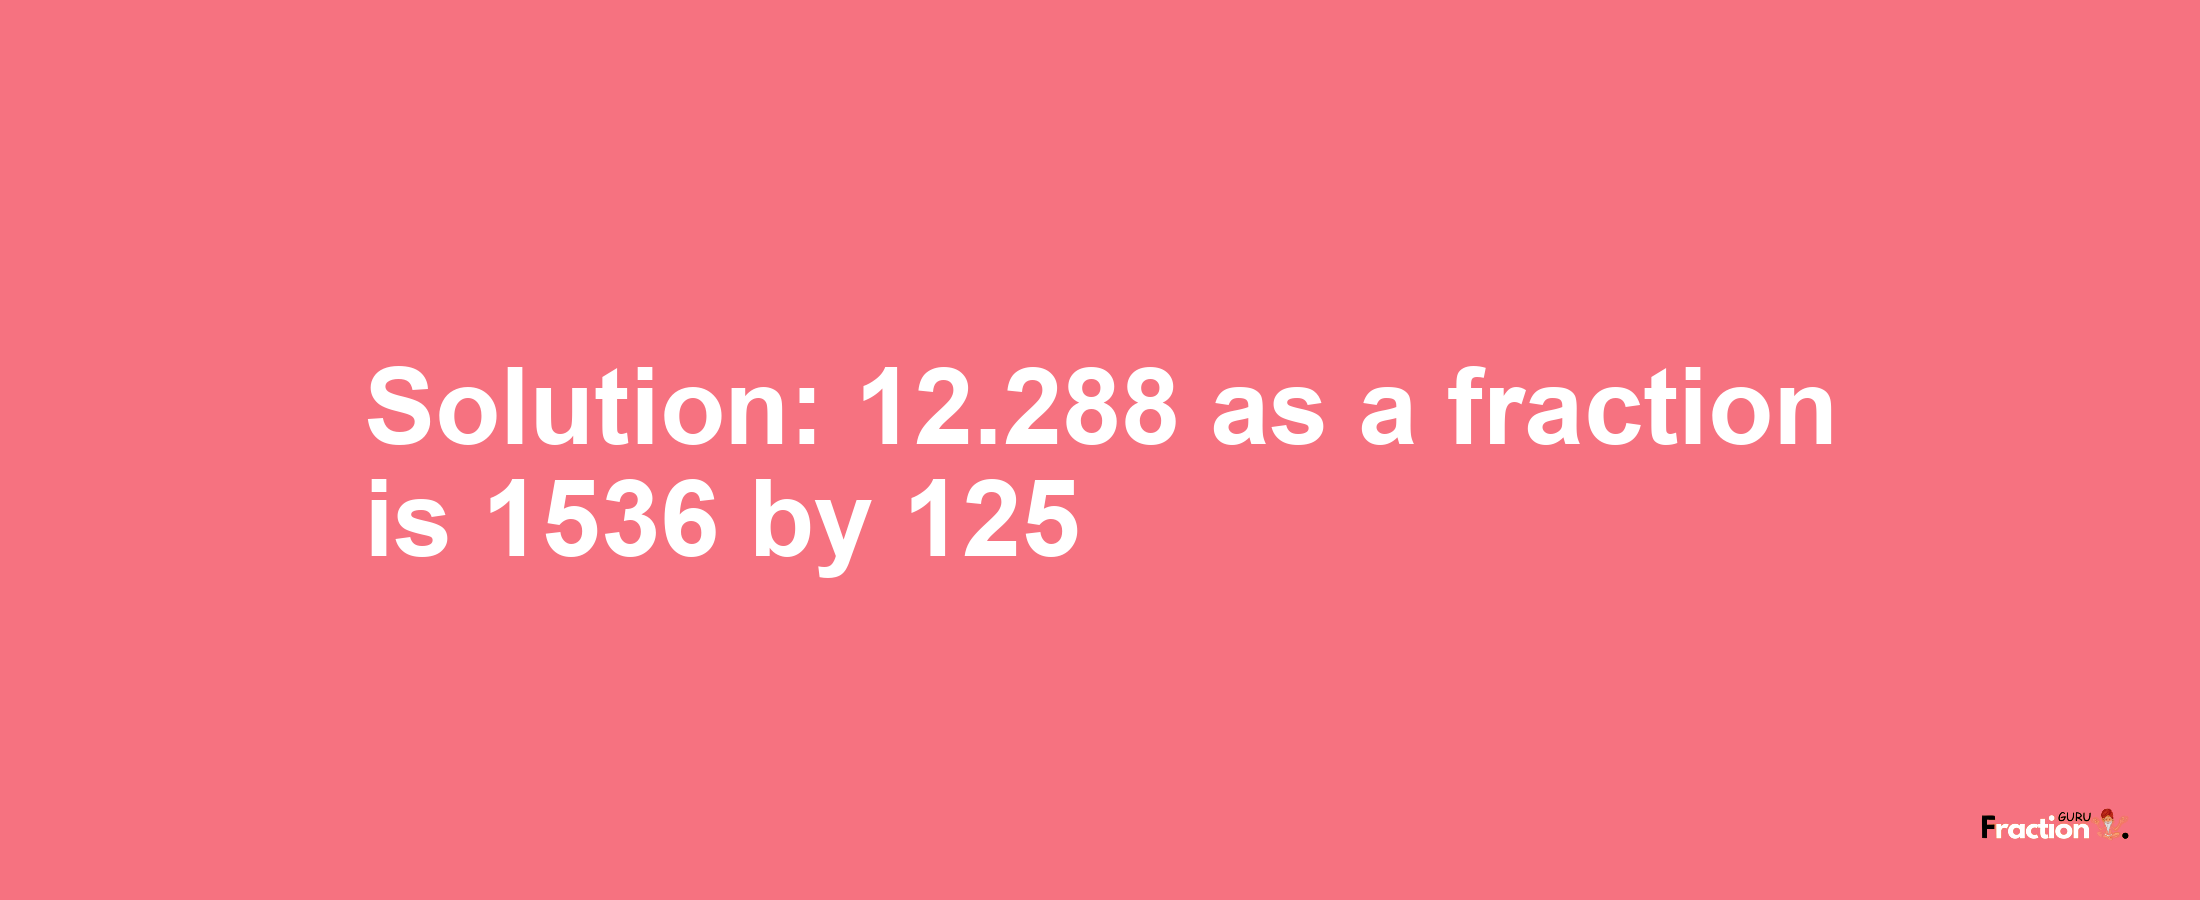 Solution:12.288 as a fraction is 1536/125